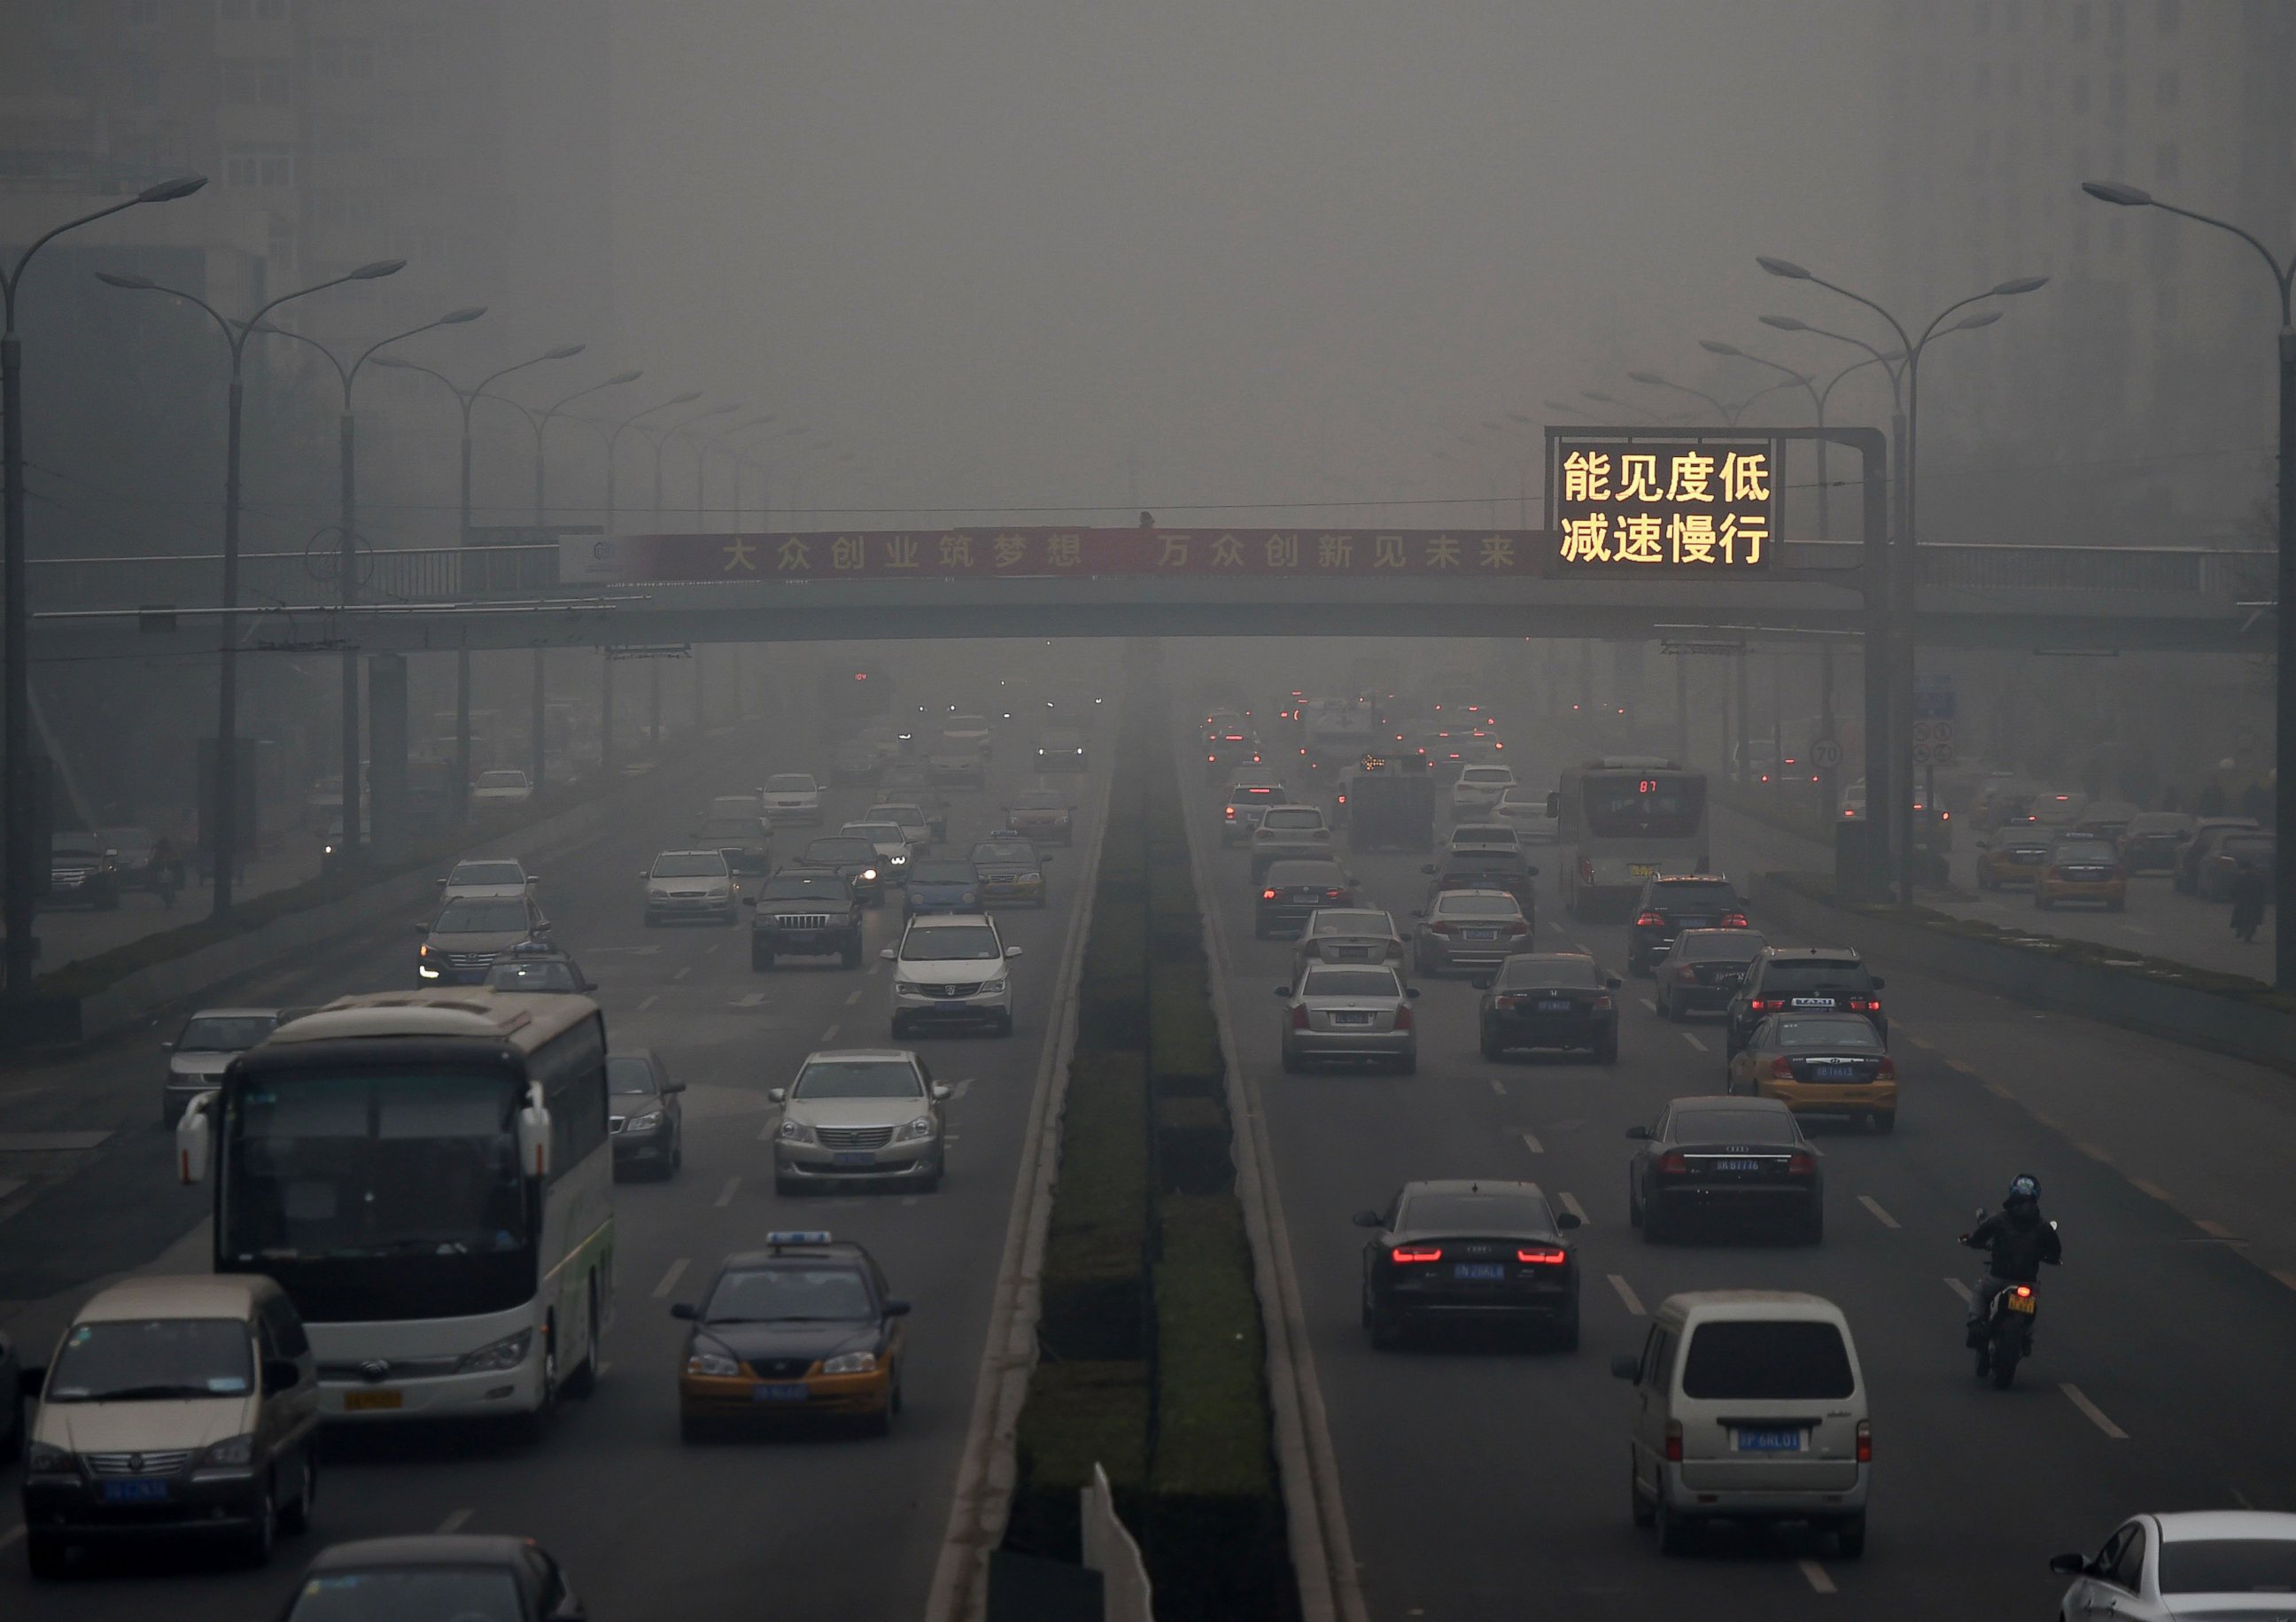 PHOTO: Vehicles run in smog on a street in Beijing, China, Nov. 30, 2015.